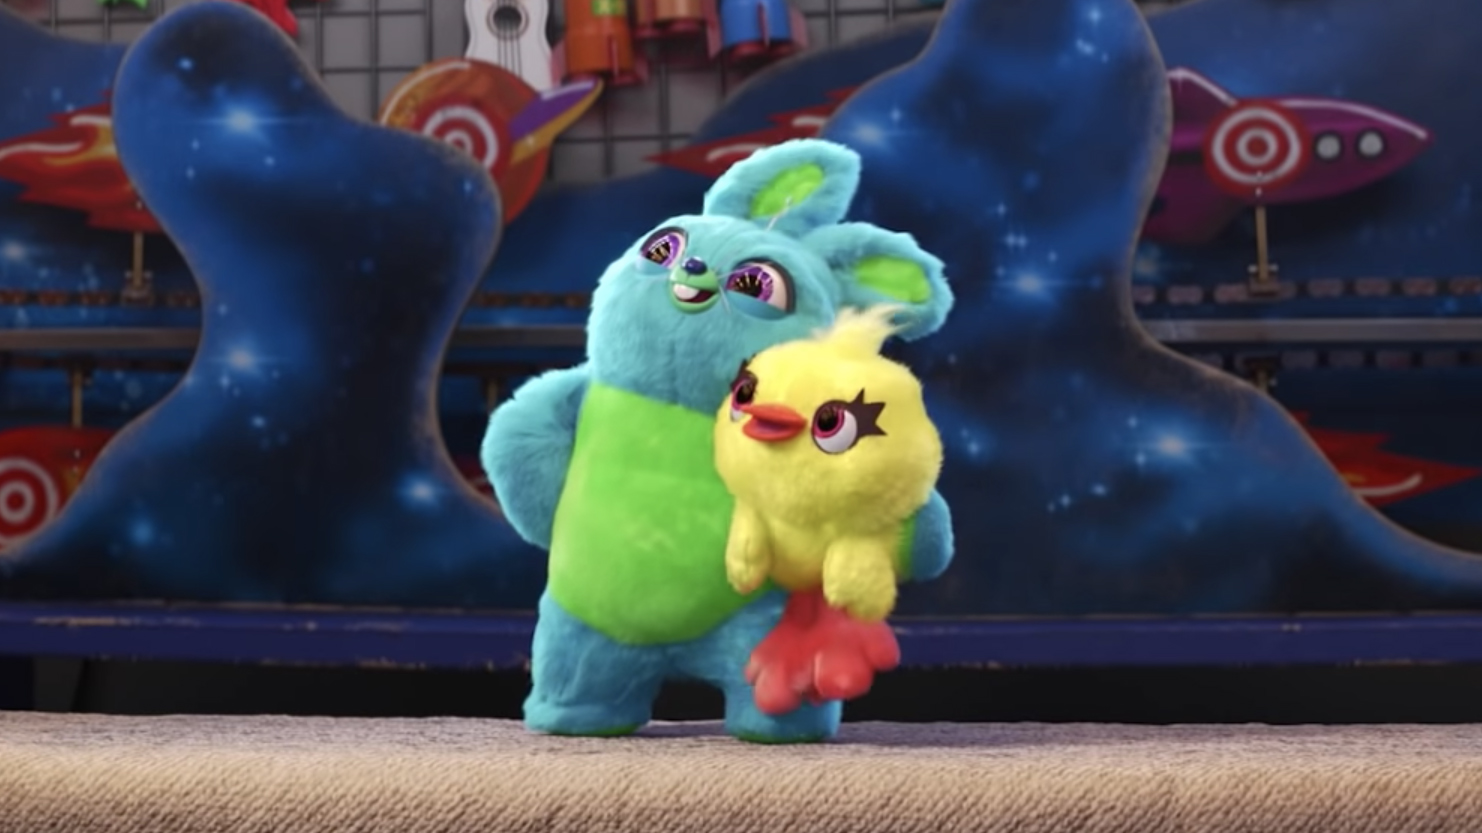 bunny and ducky from toy story 4